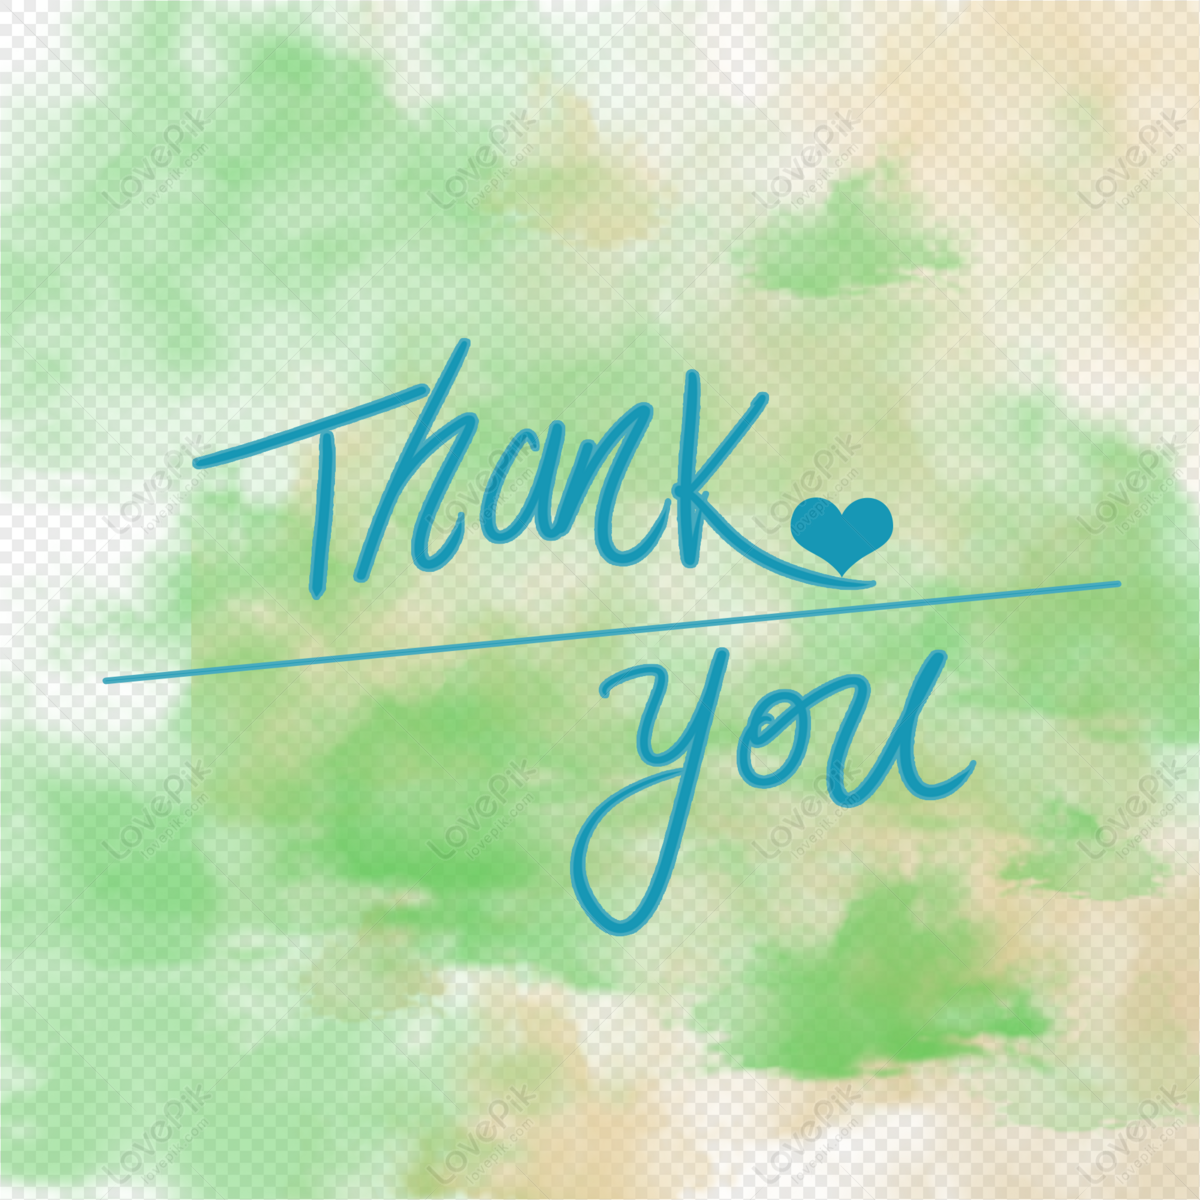 Thank You Color Font PNG Hd Transparent Image And Clipart Image ...